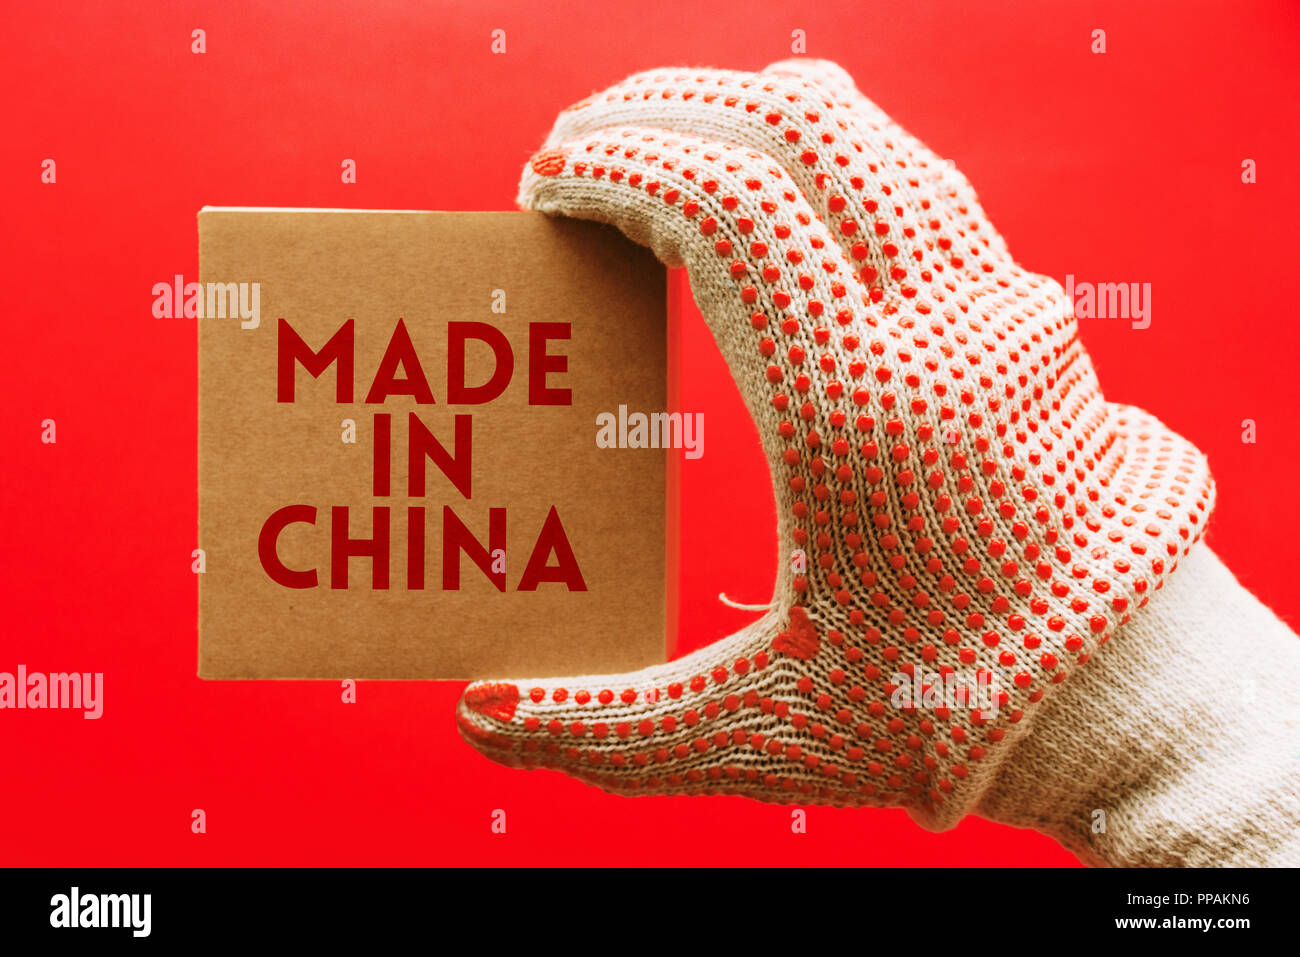 Made in China, worker with protective gloves holding cardboard product package over red background which is the primary color of Chinese national flag Stock Photo